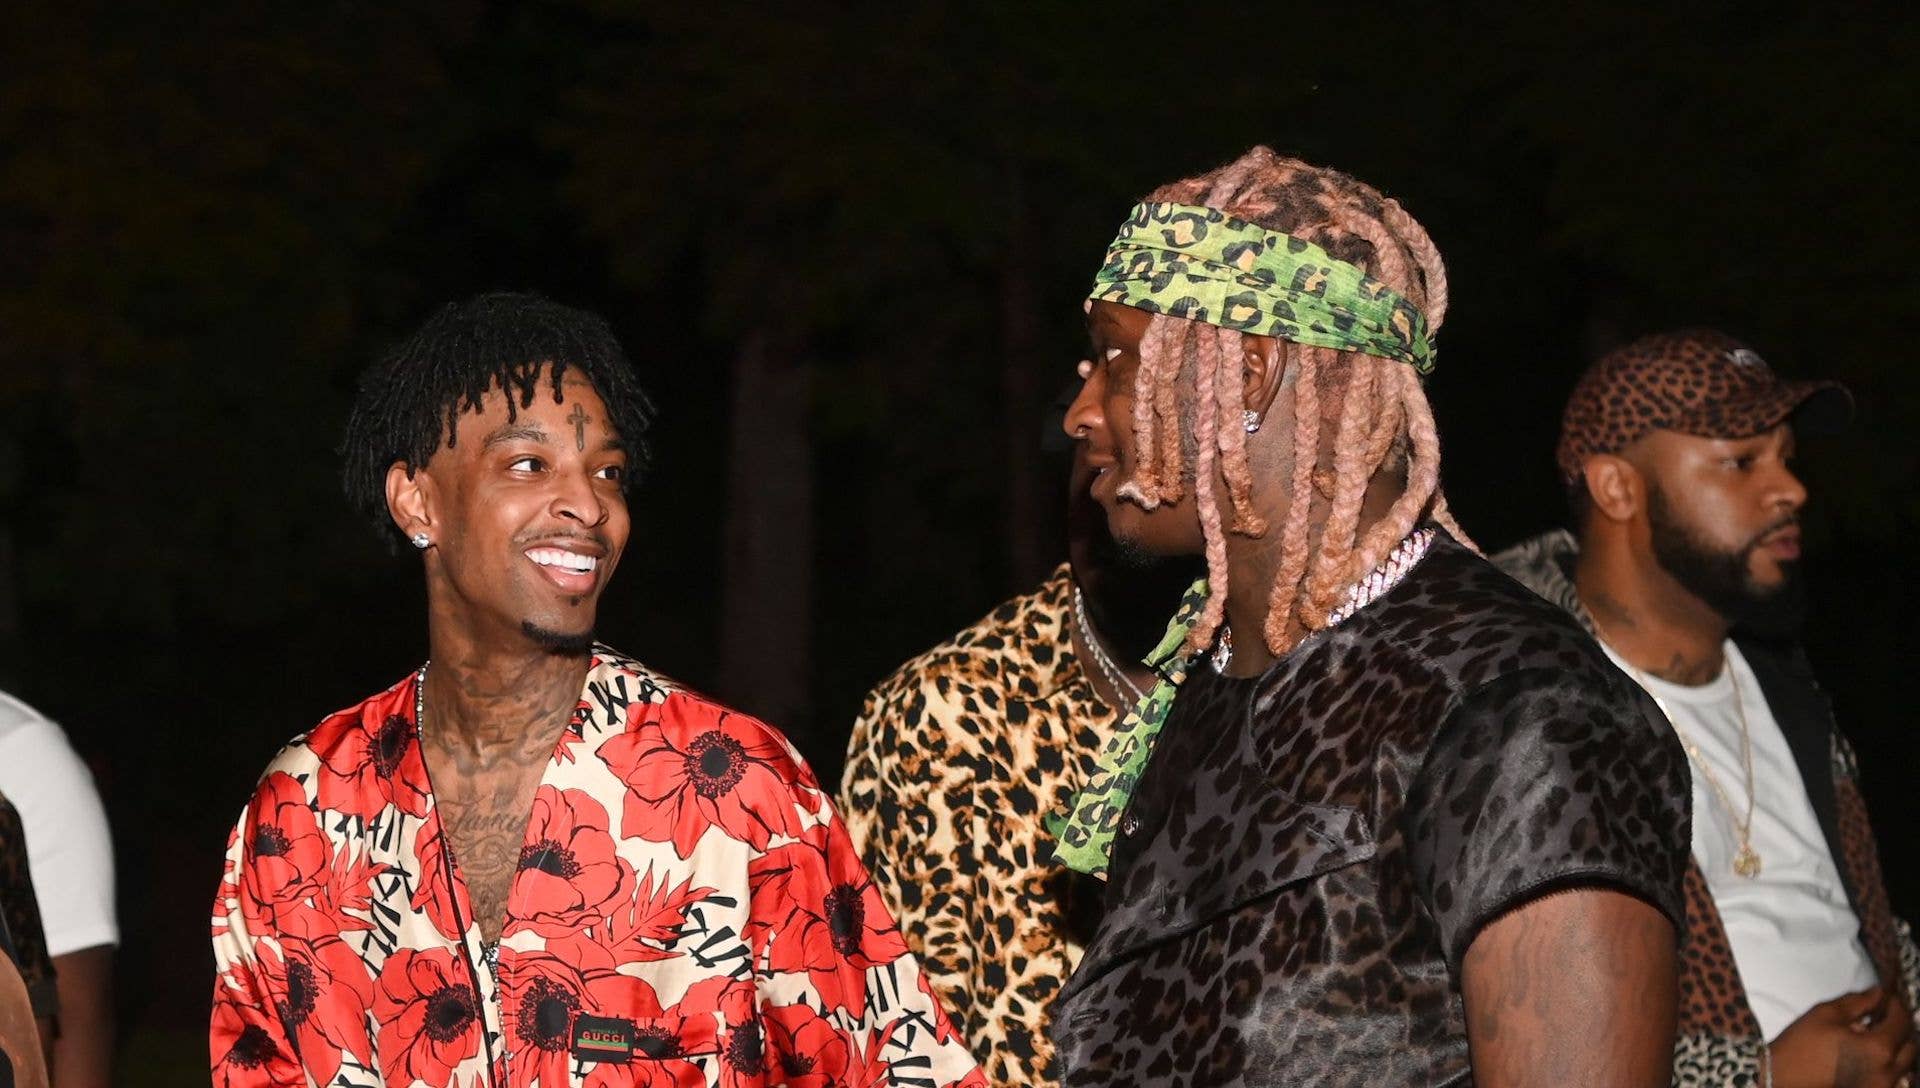 Young Thug Surprises 21 Savage With Custom Truck Worth $150K for